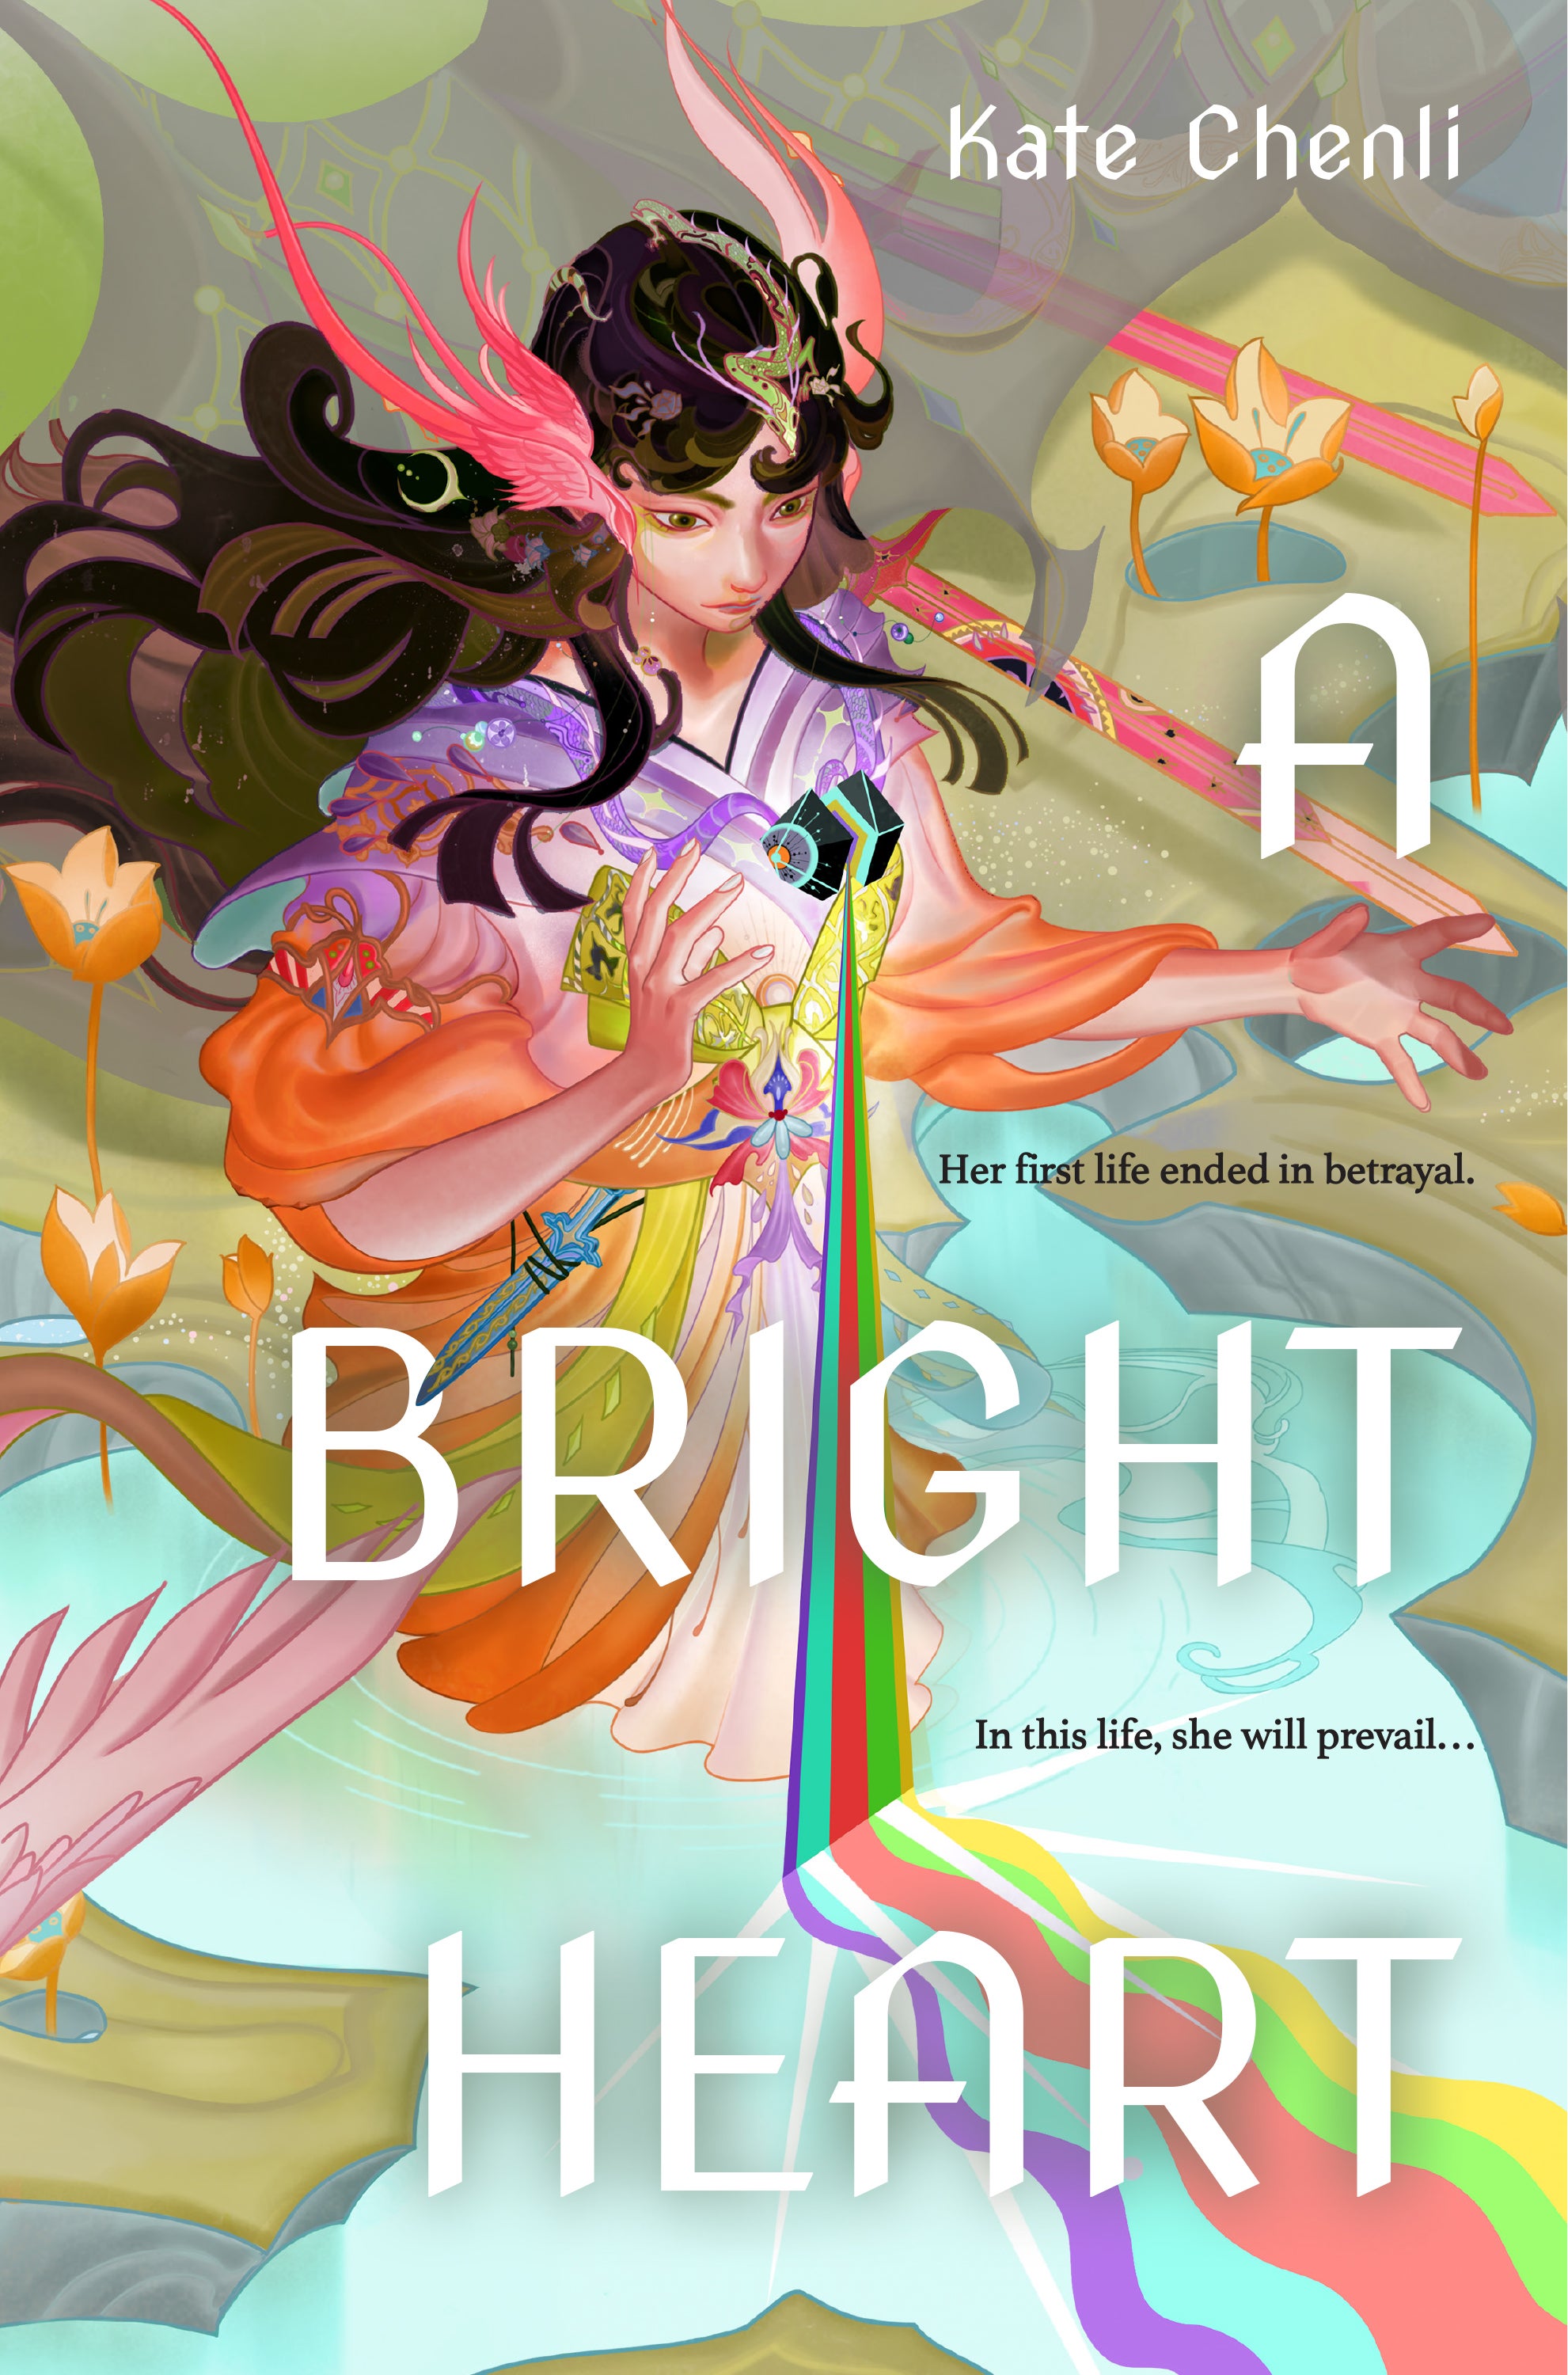 Read Into A Bright Heart’s Stunning, Folklore-Inspired Cover